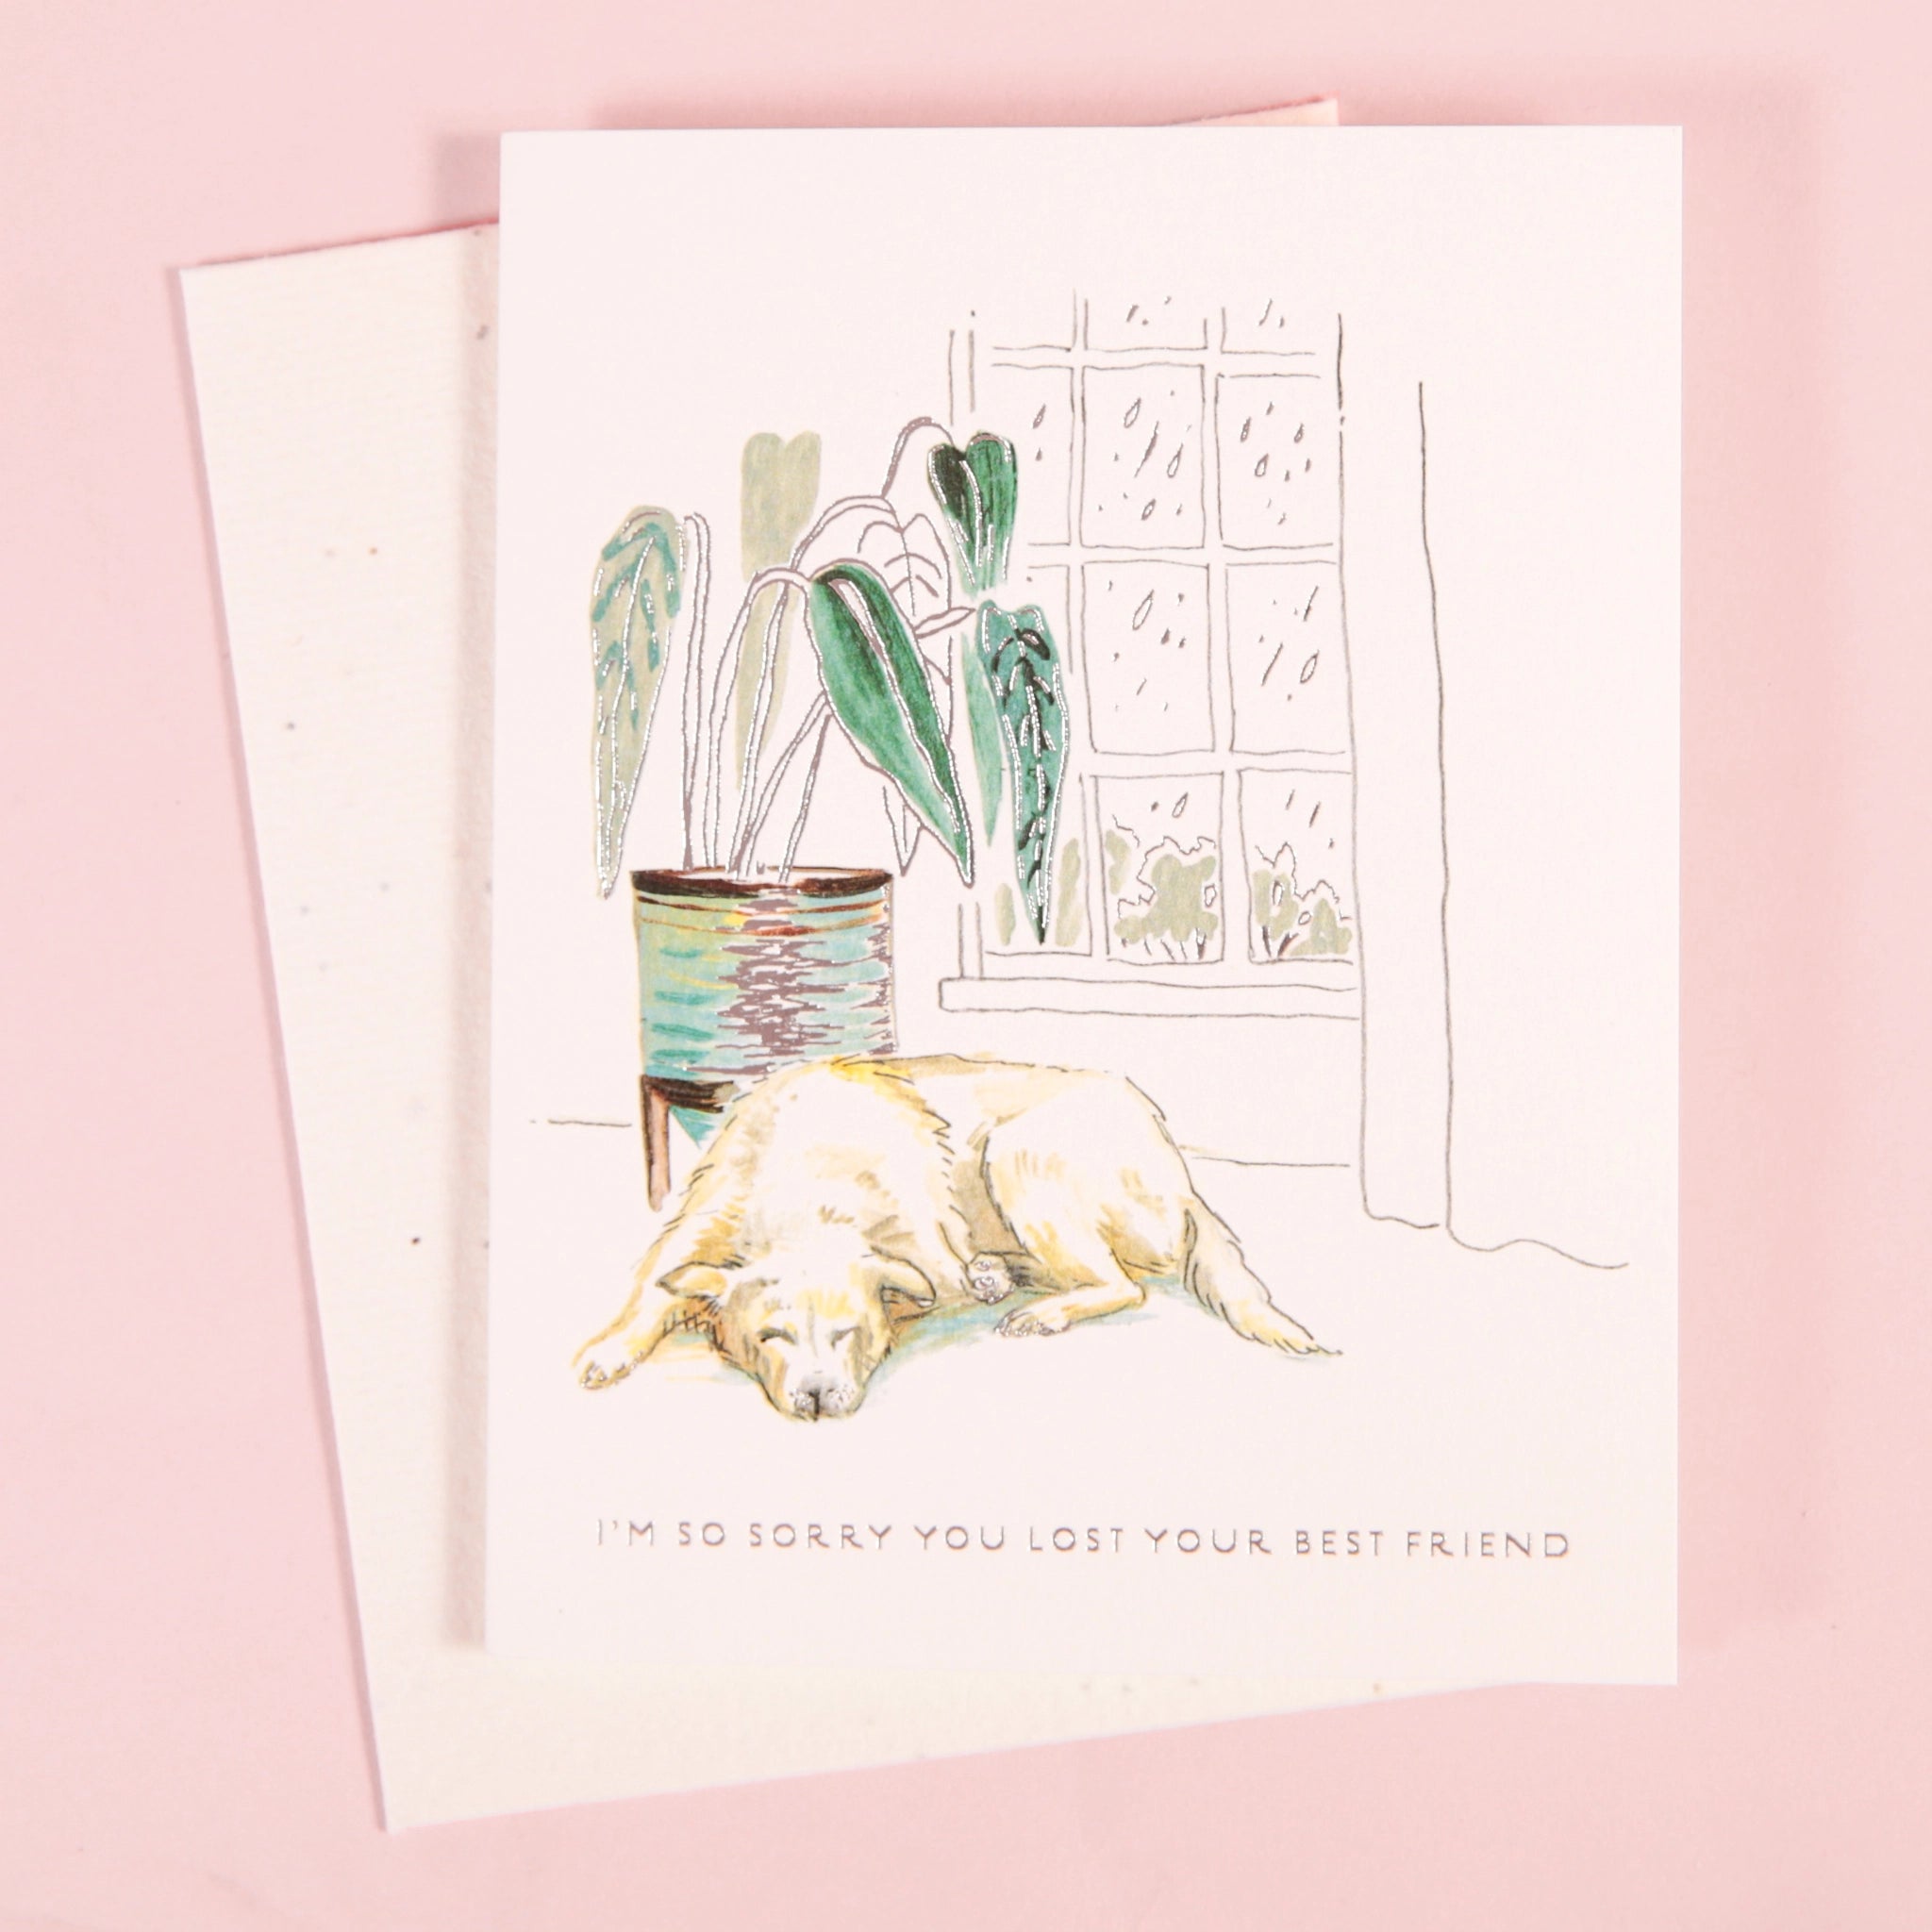 On a light pink background is a white card and envelope with an illustration of a potted green plant, a window with rain falling outside of it and a sleeping dog along with small text at the bottom that reads, &quot;I&#39;m so sorry you lost your best friend&quot;.